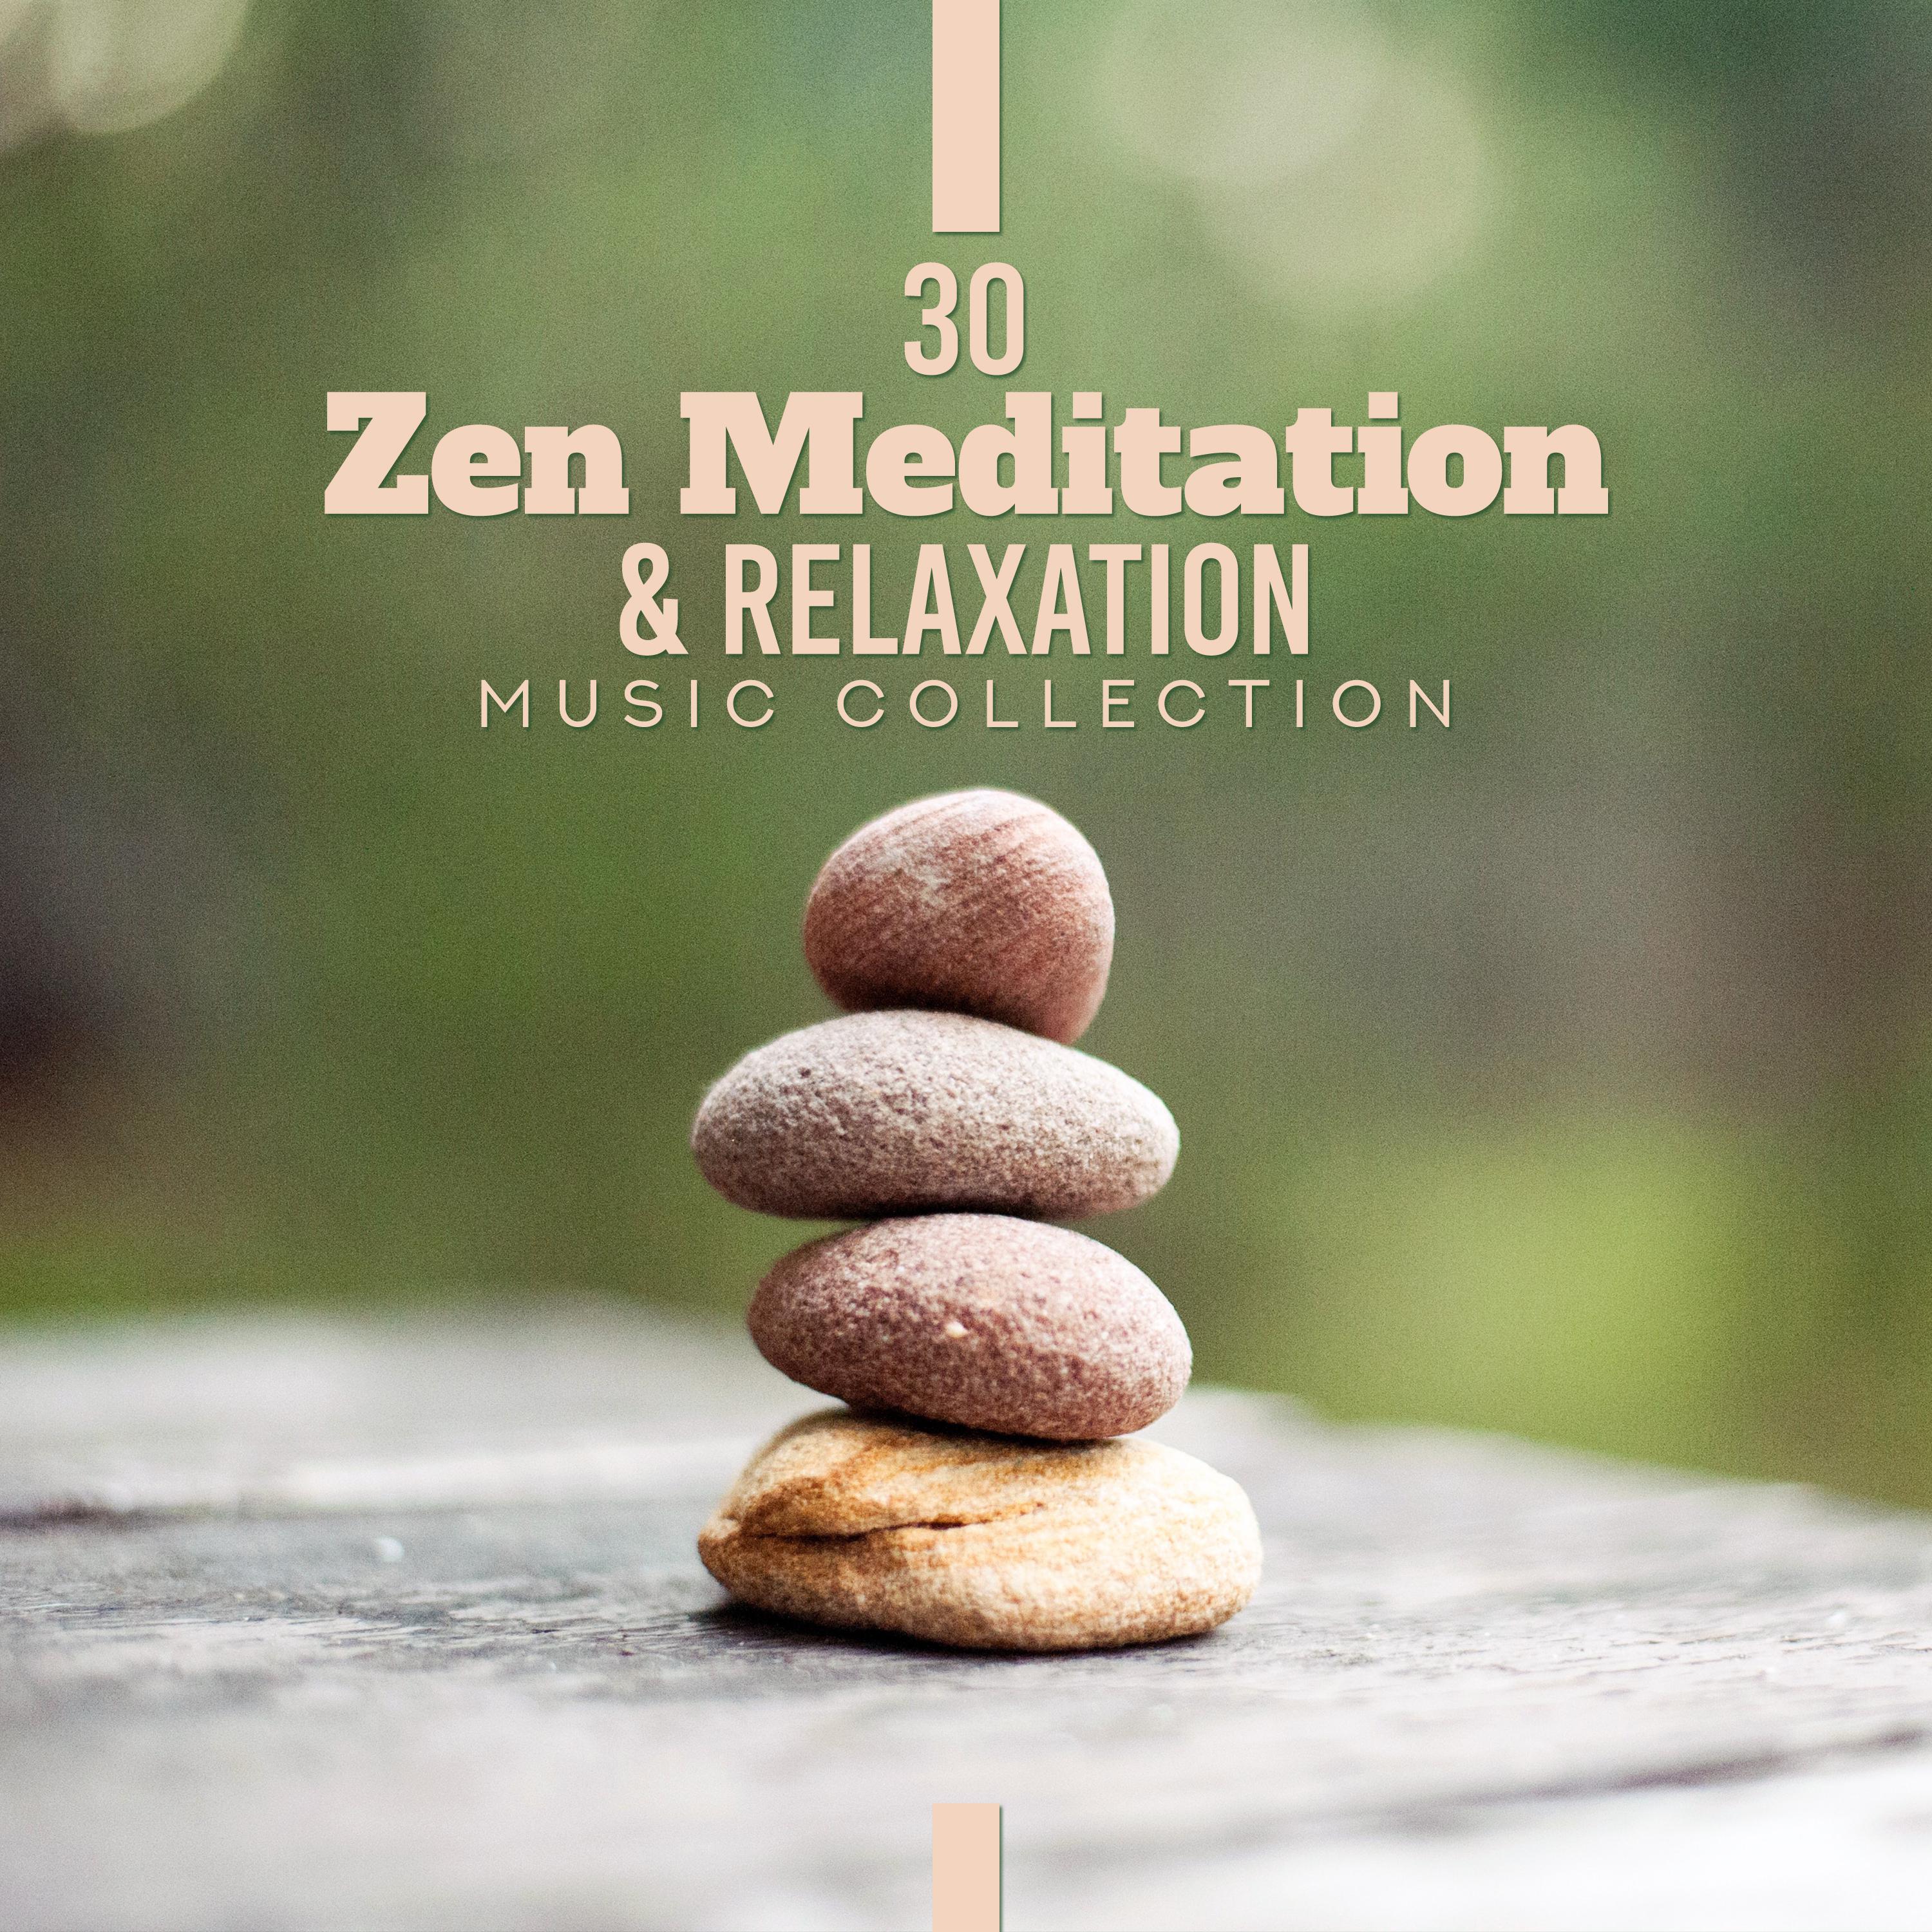 30 Zen Meditation & Relaxation Music Collection